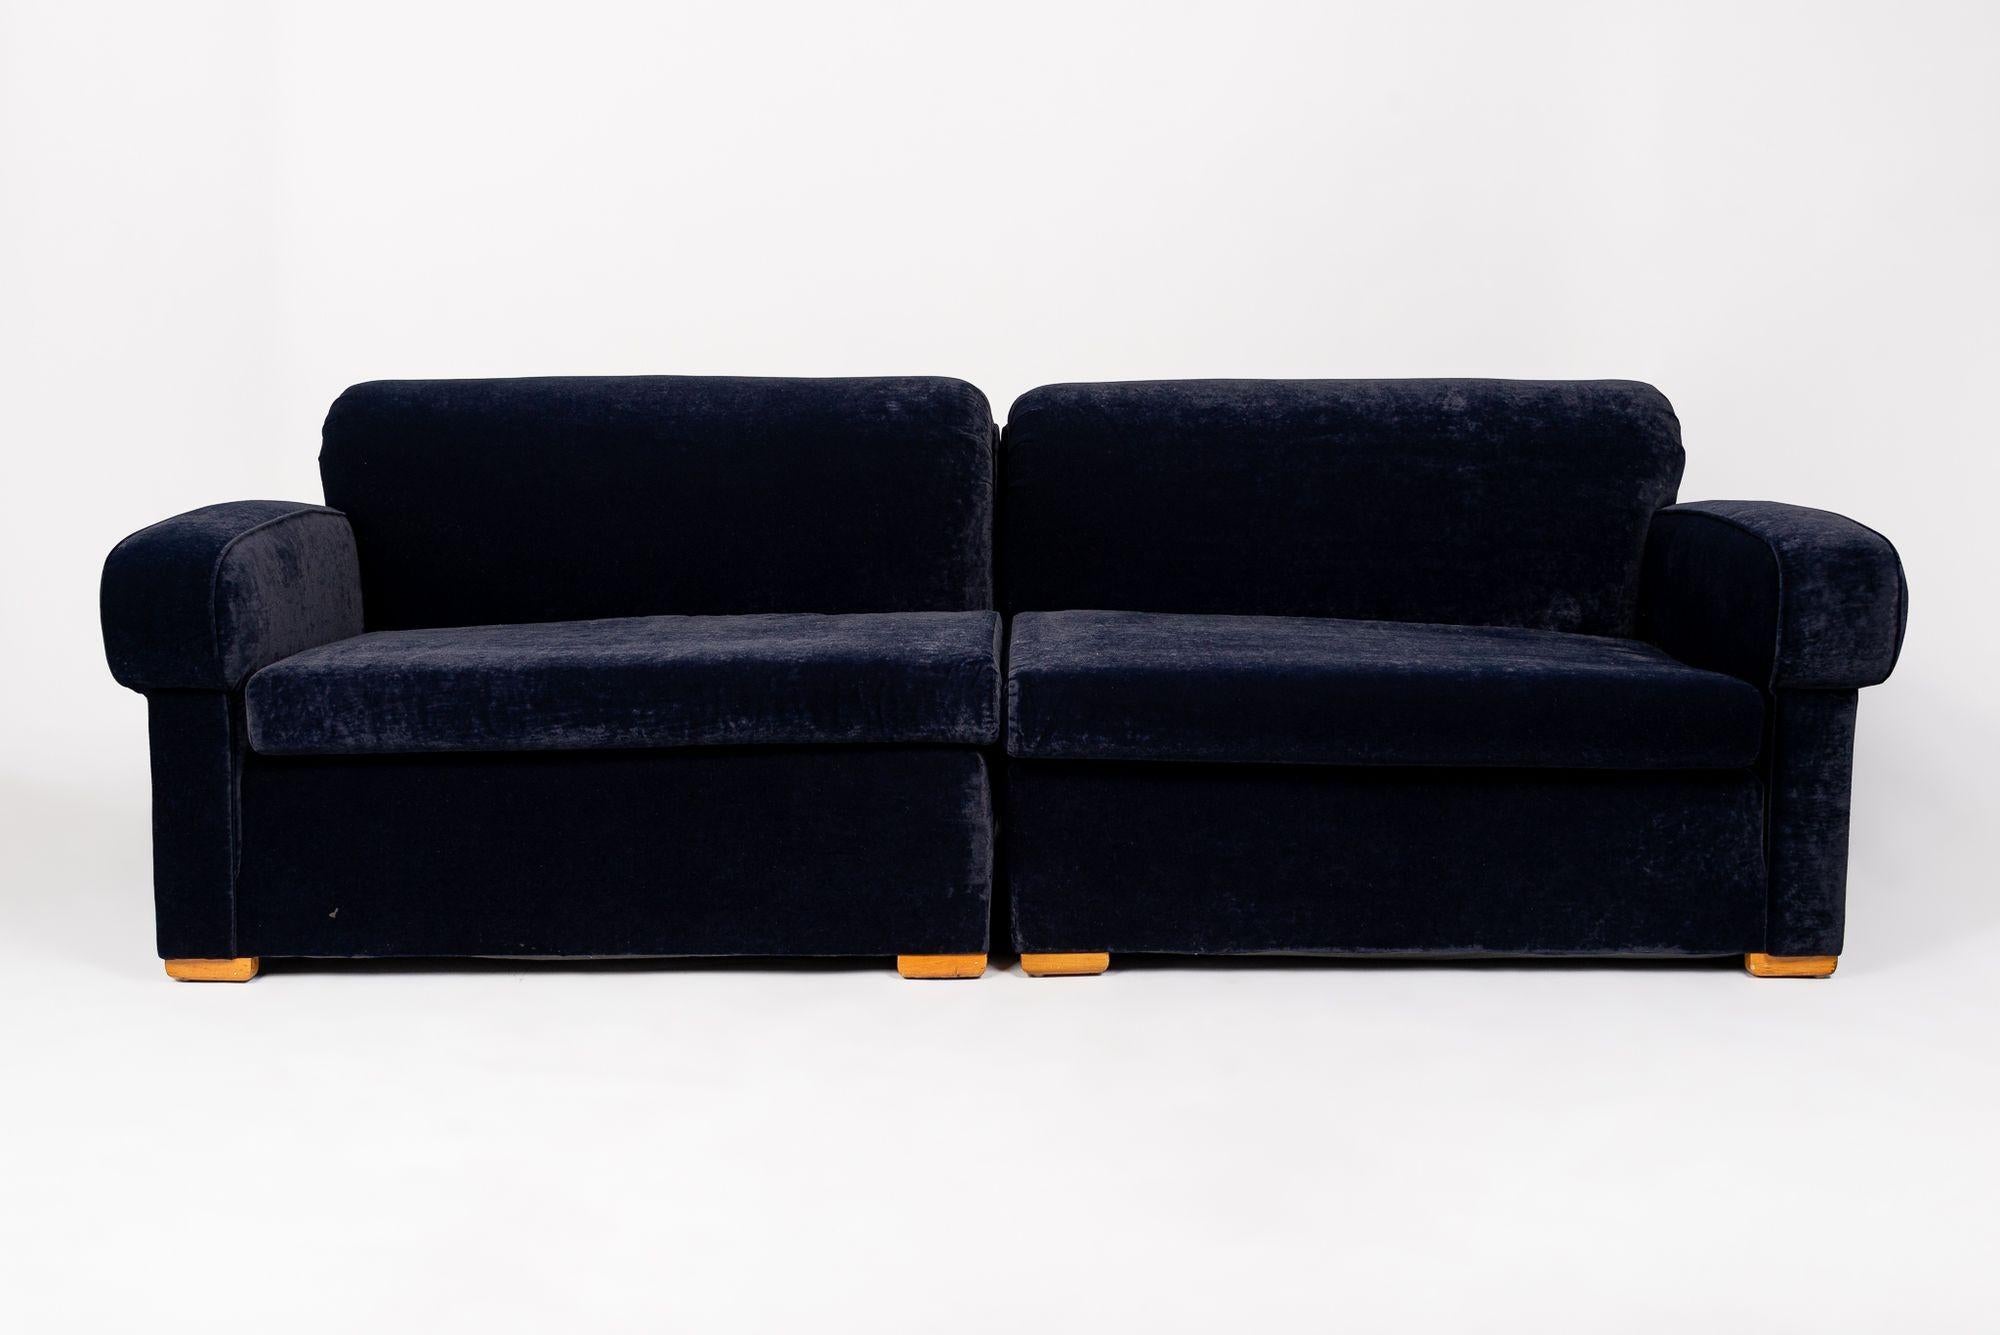 This incredible and rare antique velvet Art Deco sofa is circa 1940. The sofa has a classic Art Deco profile with clean, elegant lines and gentle, streamlined curves. It is incredibly well-built and upholstered in a gorgeous navy blue velvet fabric.